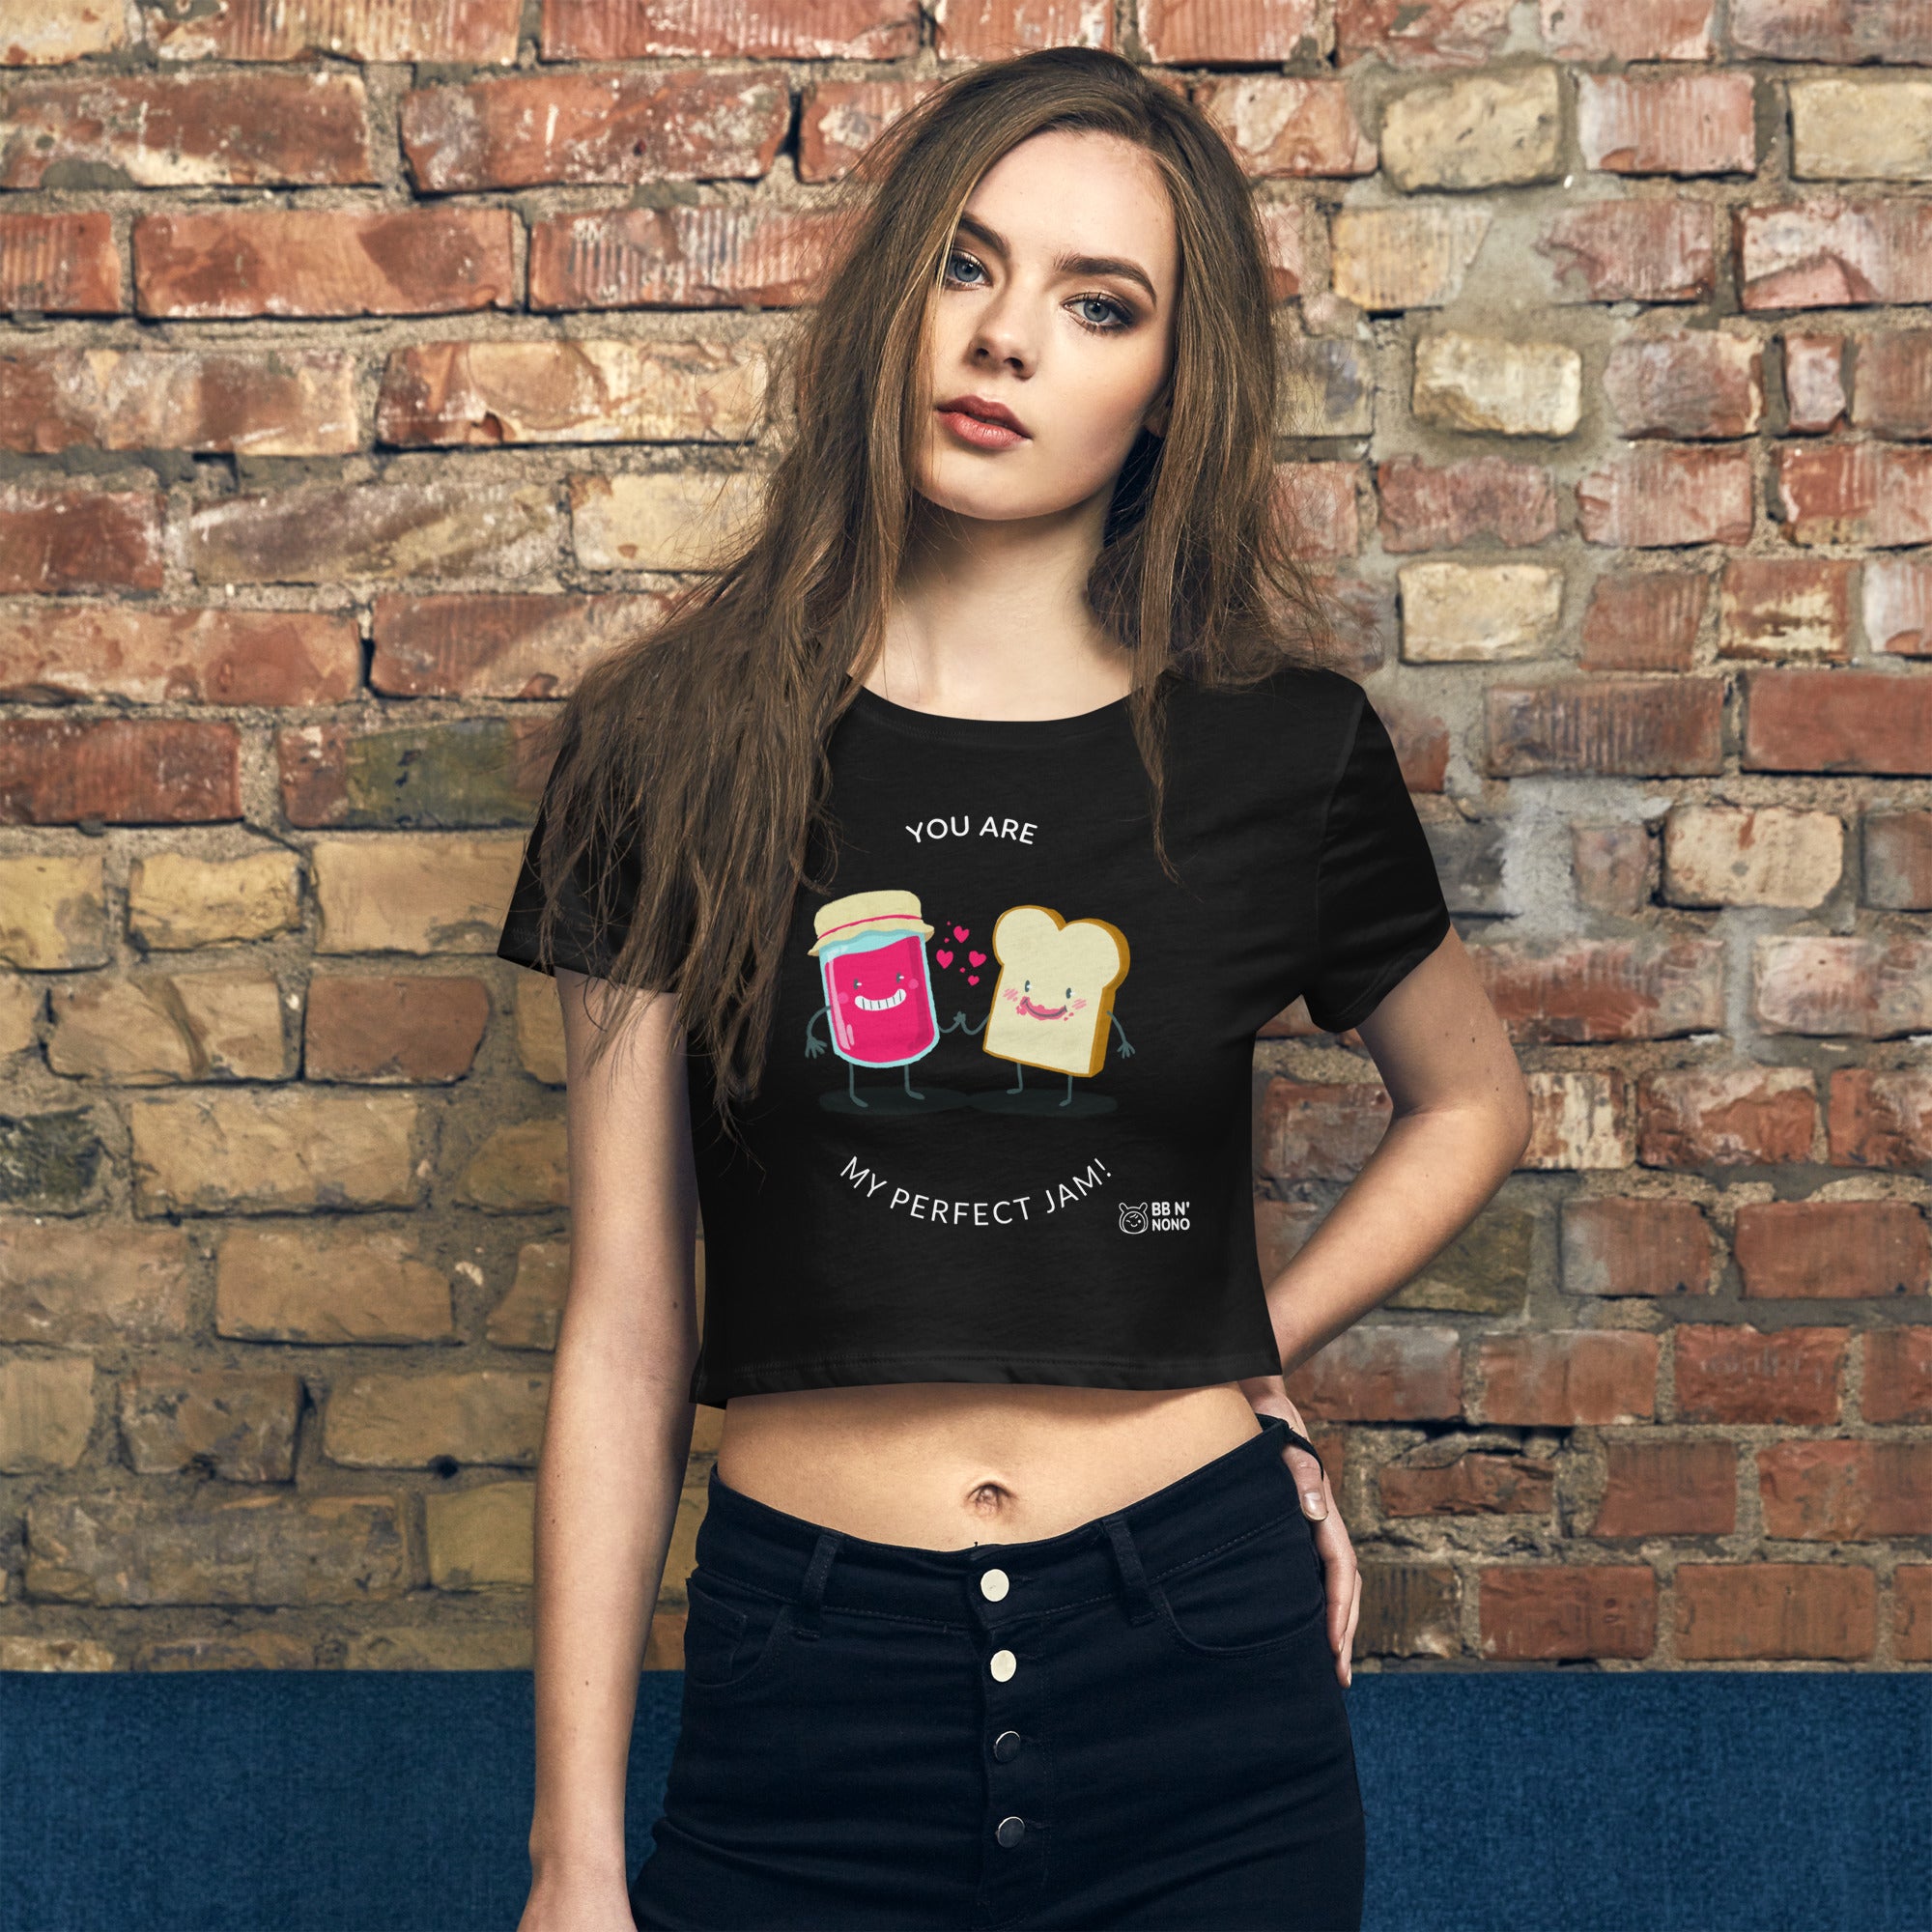 You are my perfect jam - Women’s Crop Tee